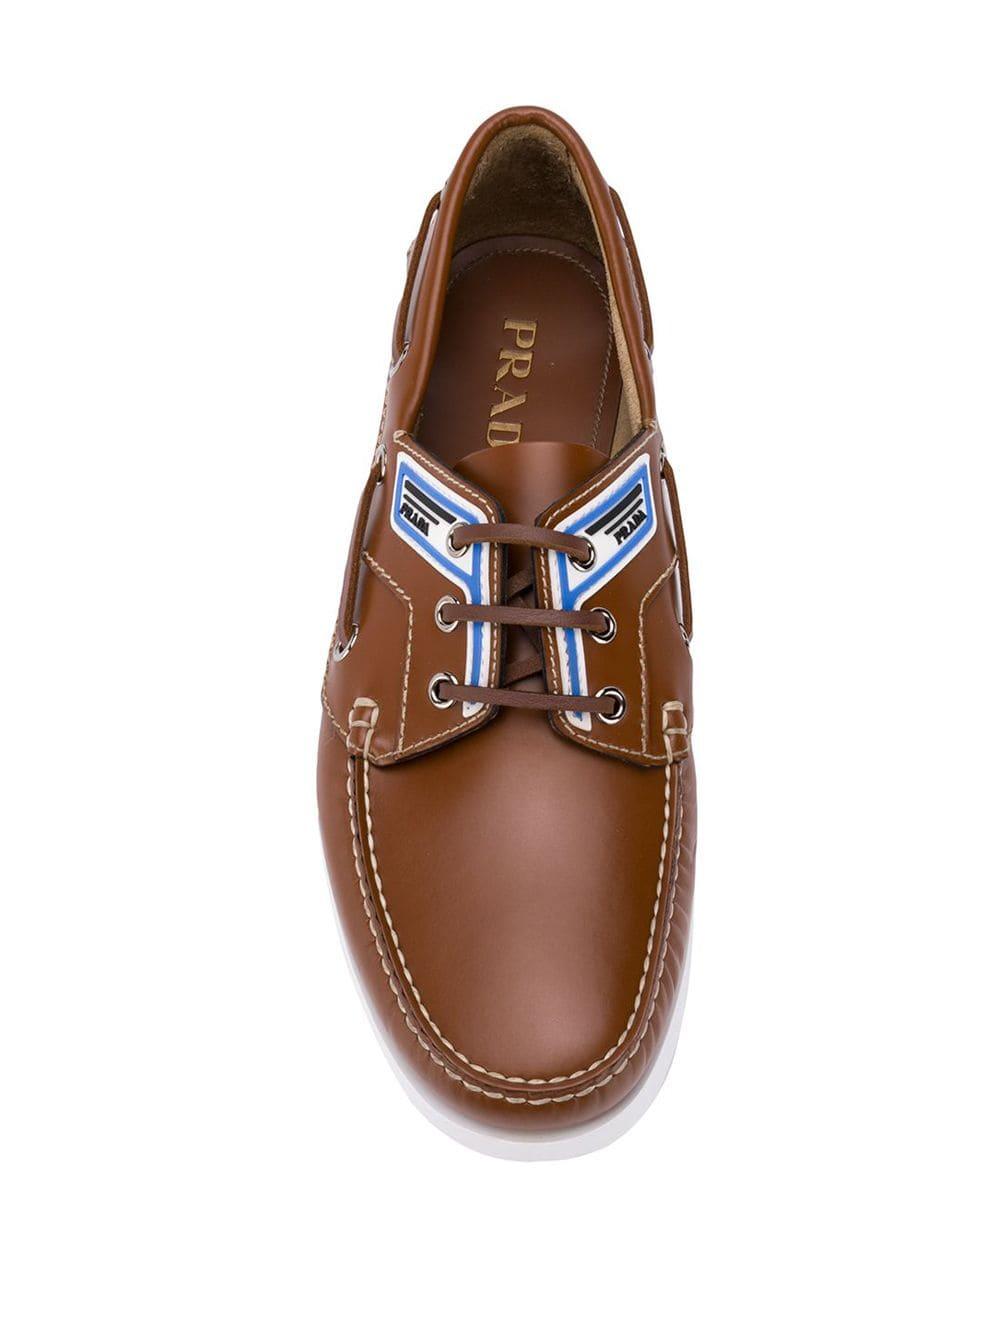 Prada Leather Logo-panel Boat Shoes in Brown/Beige (Brown) for Men - Lyst